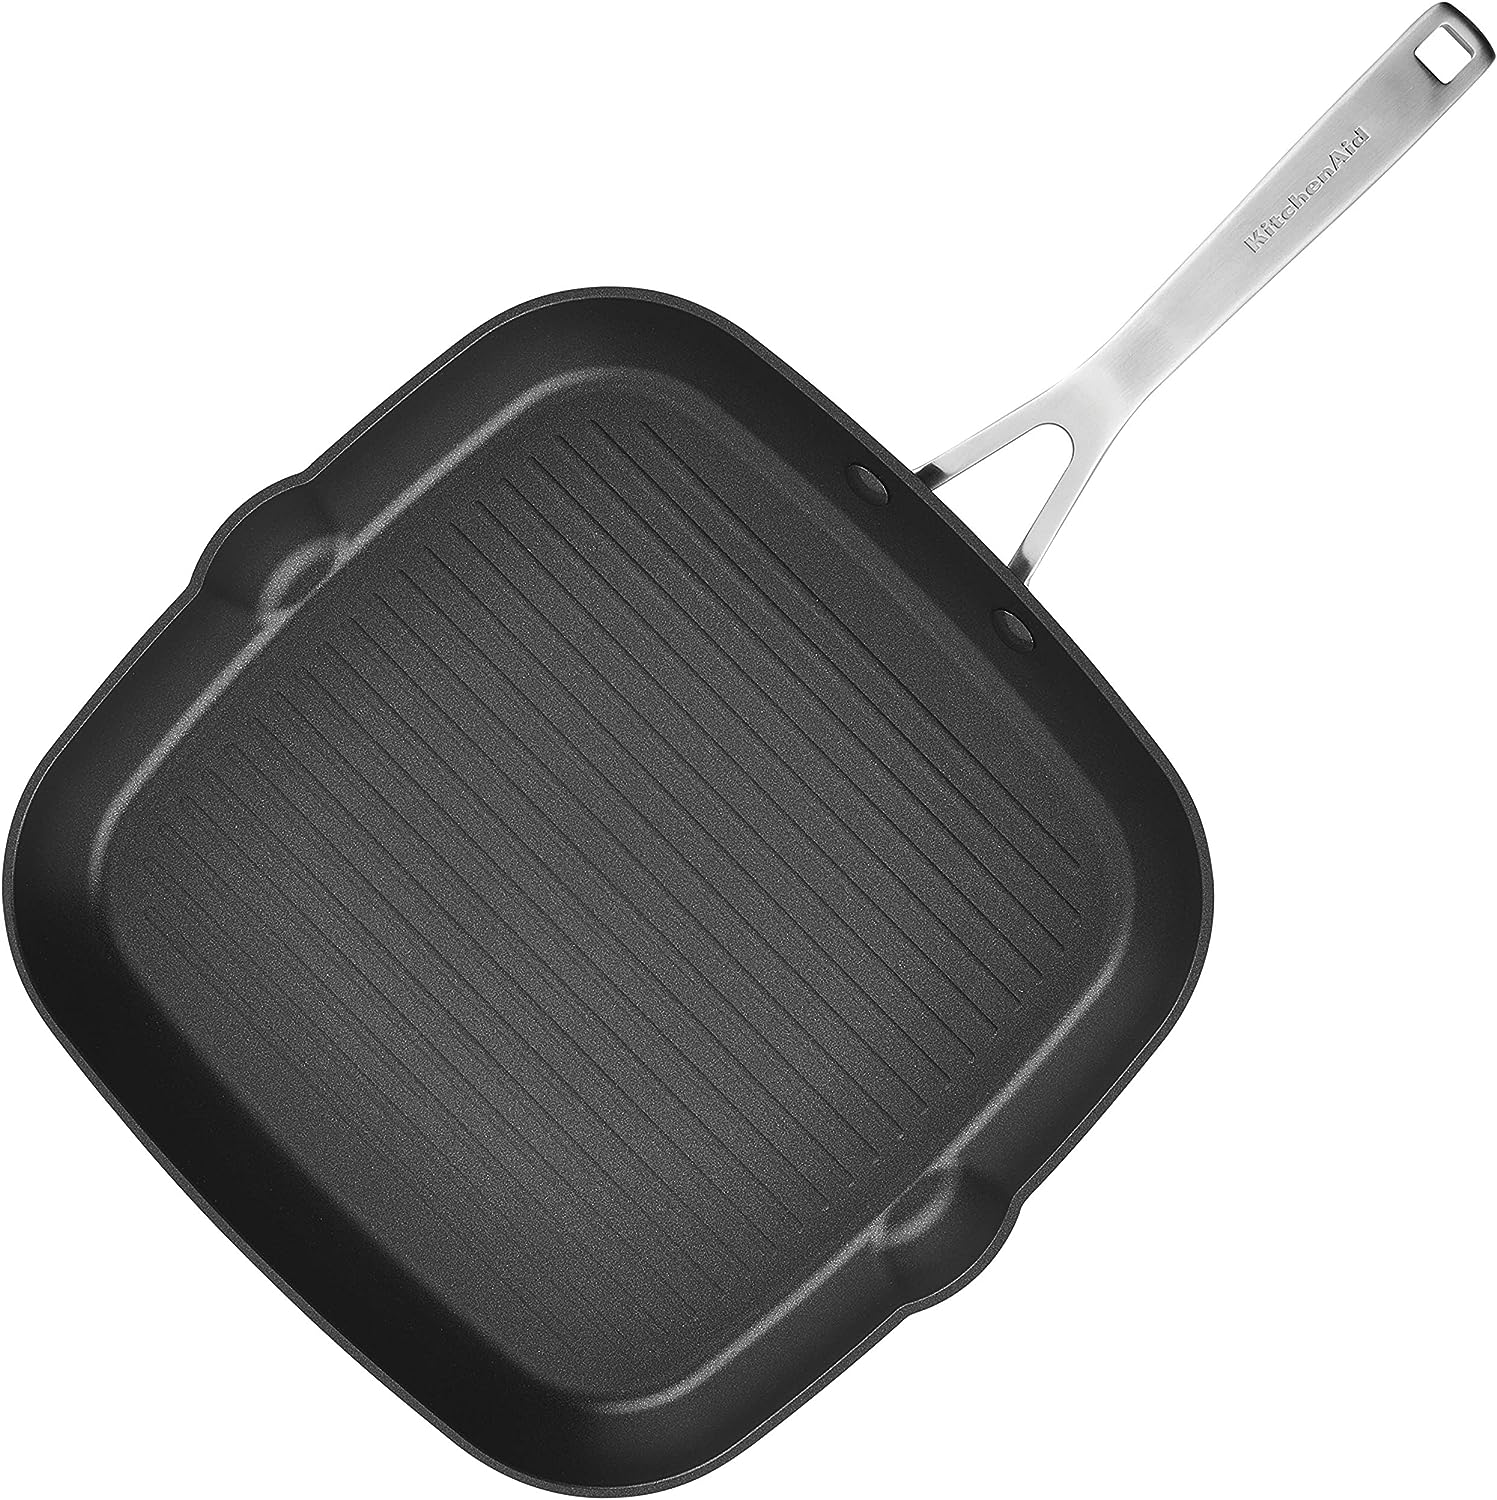 https://bigbigmart.com/wp-content/uploads/2023/08/KitchenAid-Hard-Anodized-Induction-Nonstick-Square-Grill-Pan-Griddle-with-Pouring-Spouts-11.25-Inch-Matte-Black11.jpg